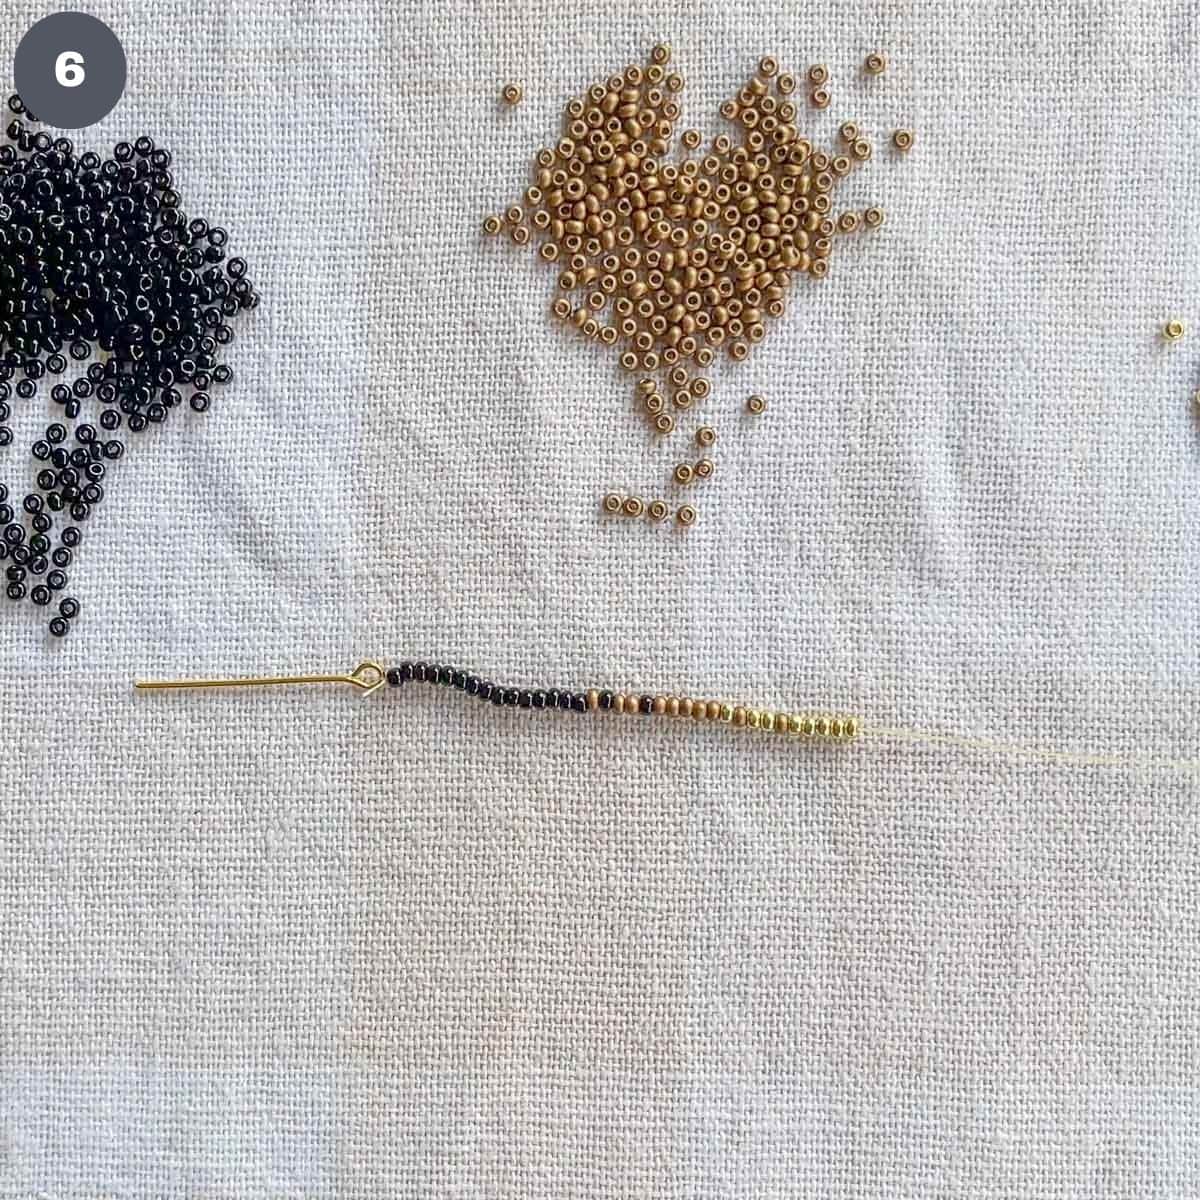 A strand of black, bronze and gold seed beads.